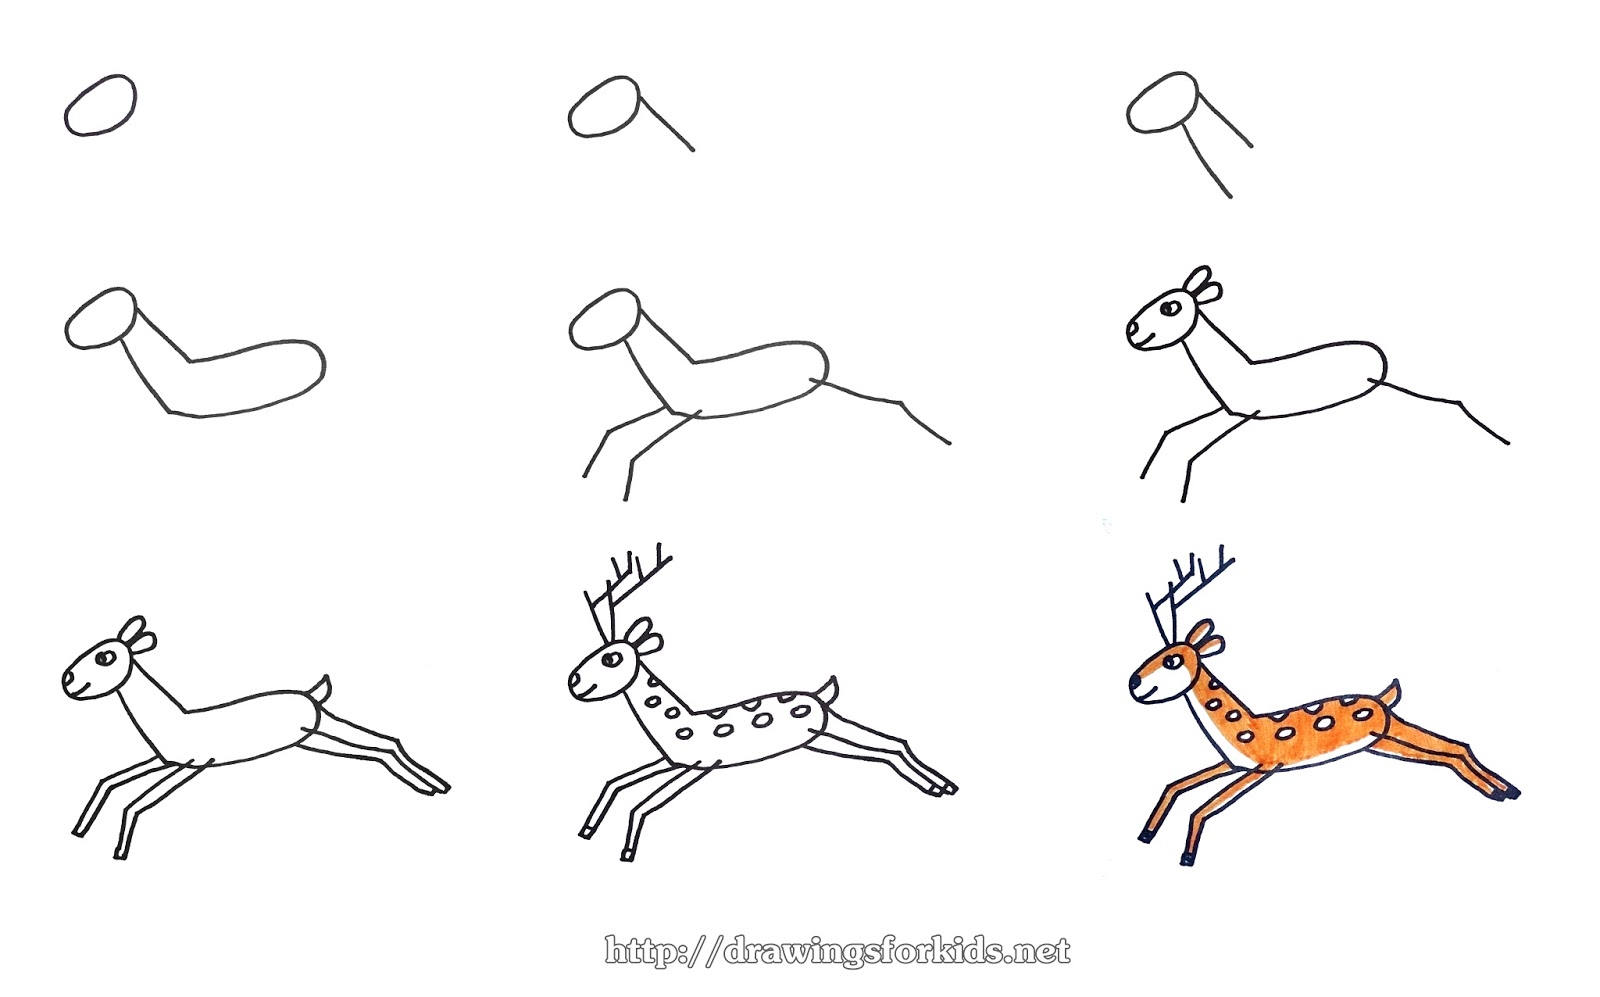 How to draw Christmas Reindeer for kids - drawingsforkids.net